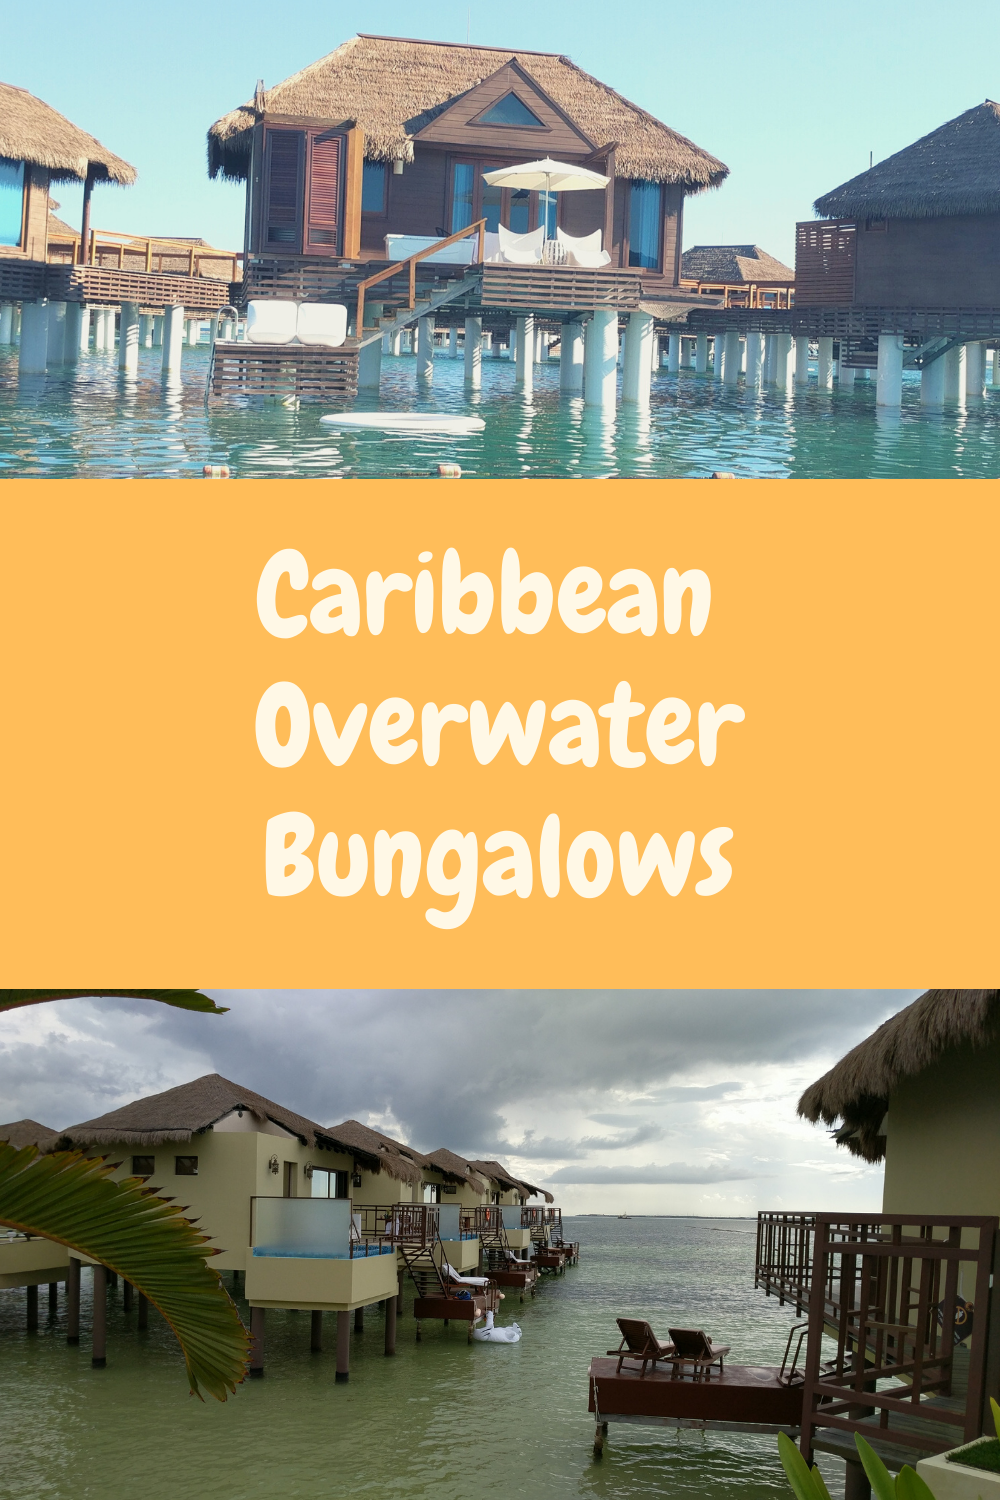 Trips with Angie Blog : Honeymoon Idea: Caribbean Overwater Bungalow